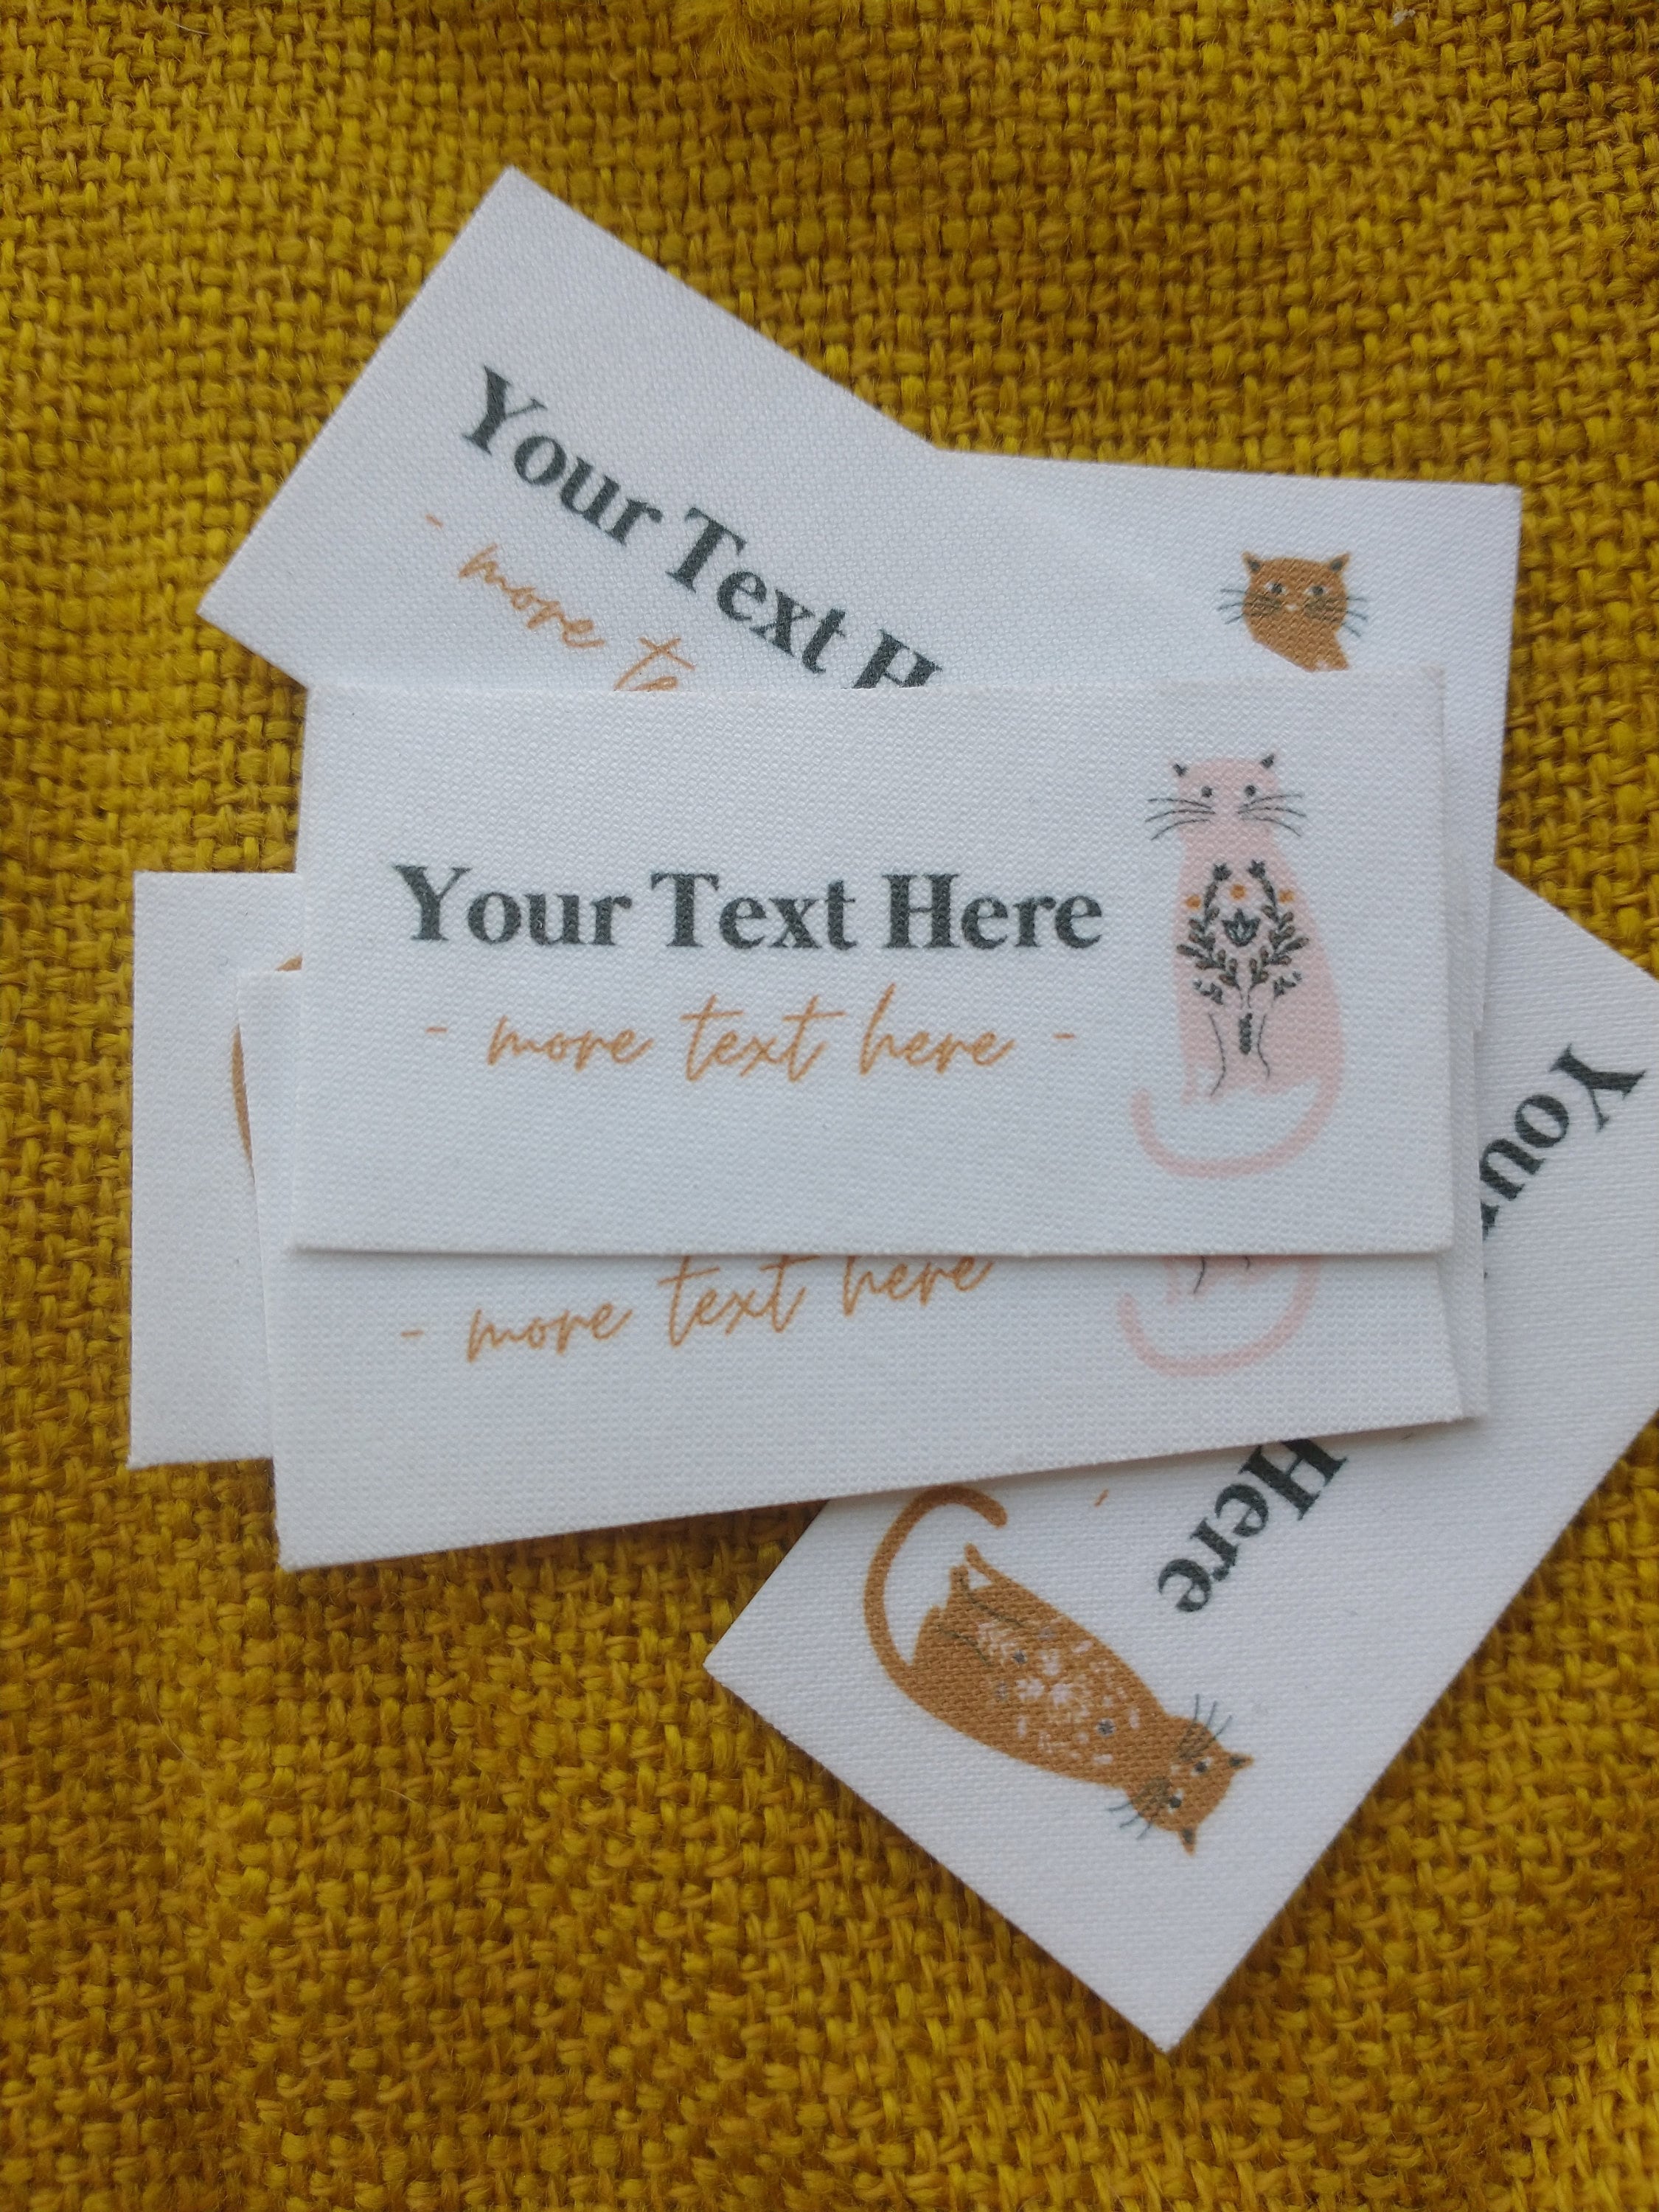 No-fray Custom Clothing Labels for Handmade Items Logo, Image, or  Personalized Text, Organic Cotton Fabric for Sewing or Knitting 